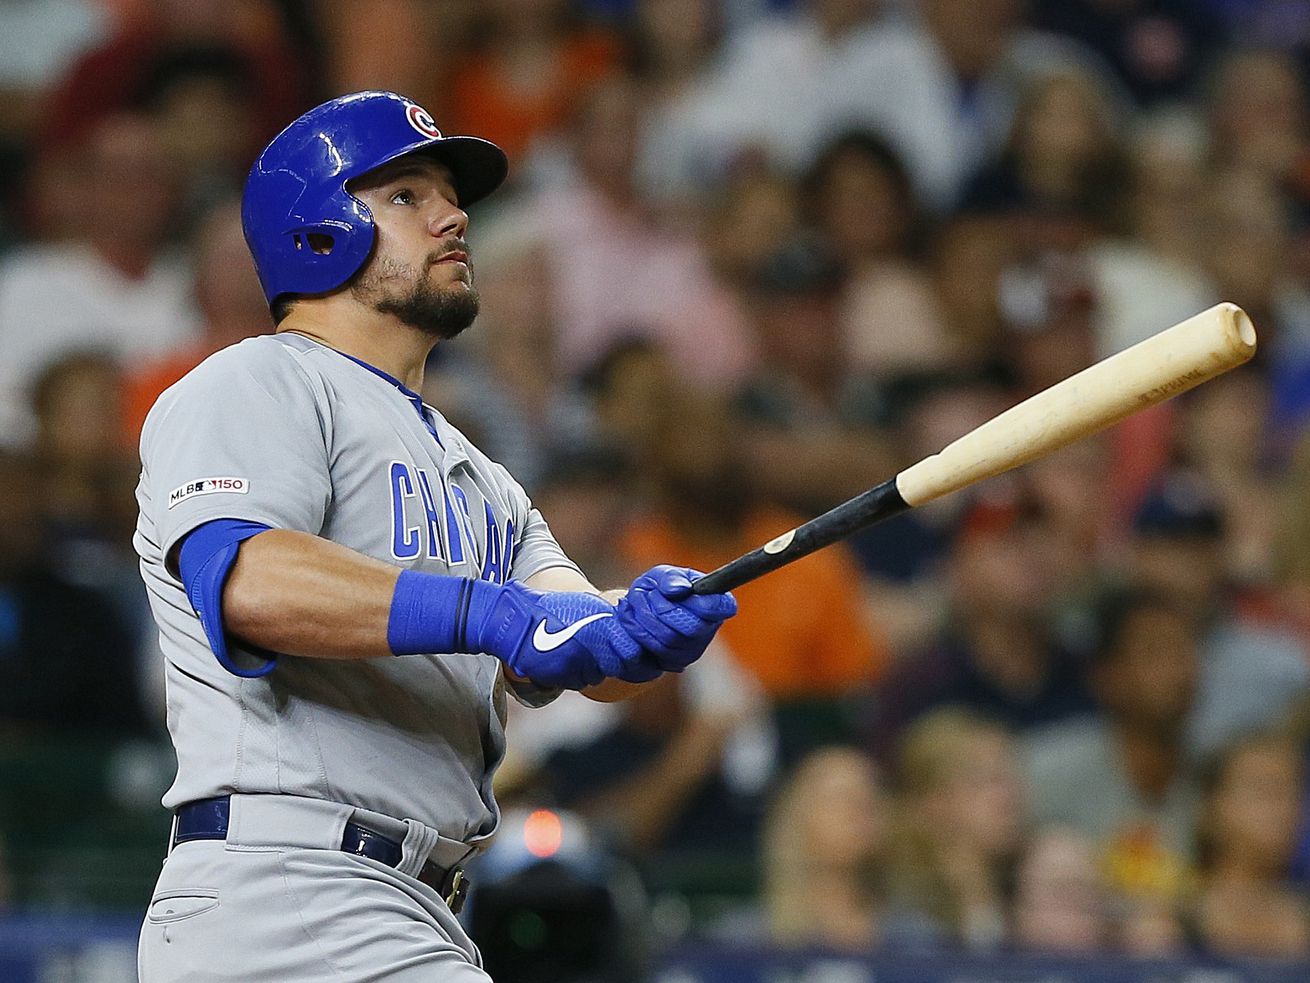 Schwarber homers during recent series in Houston.